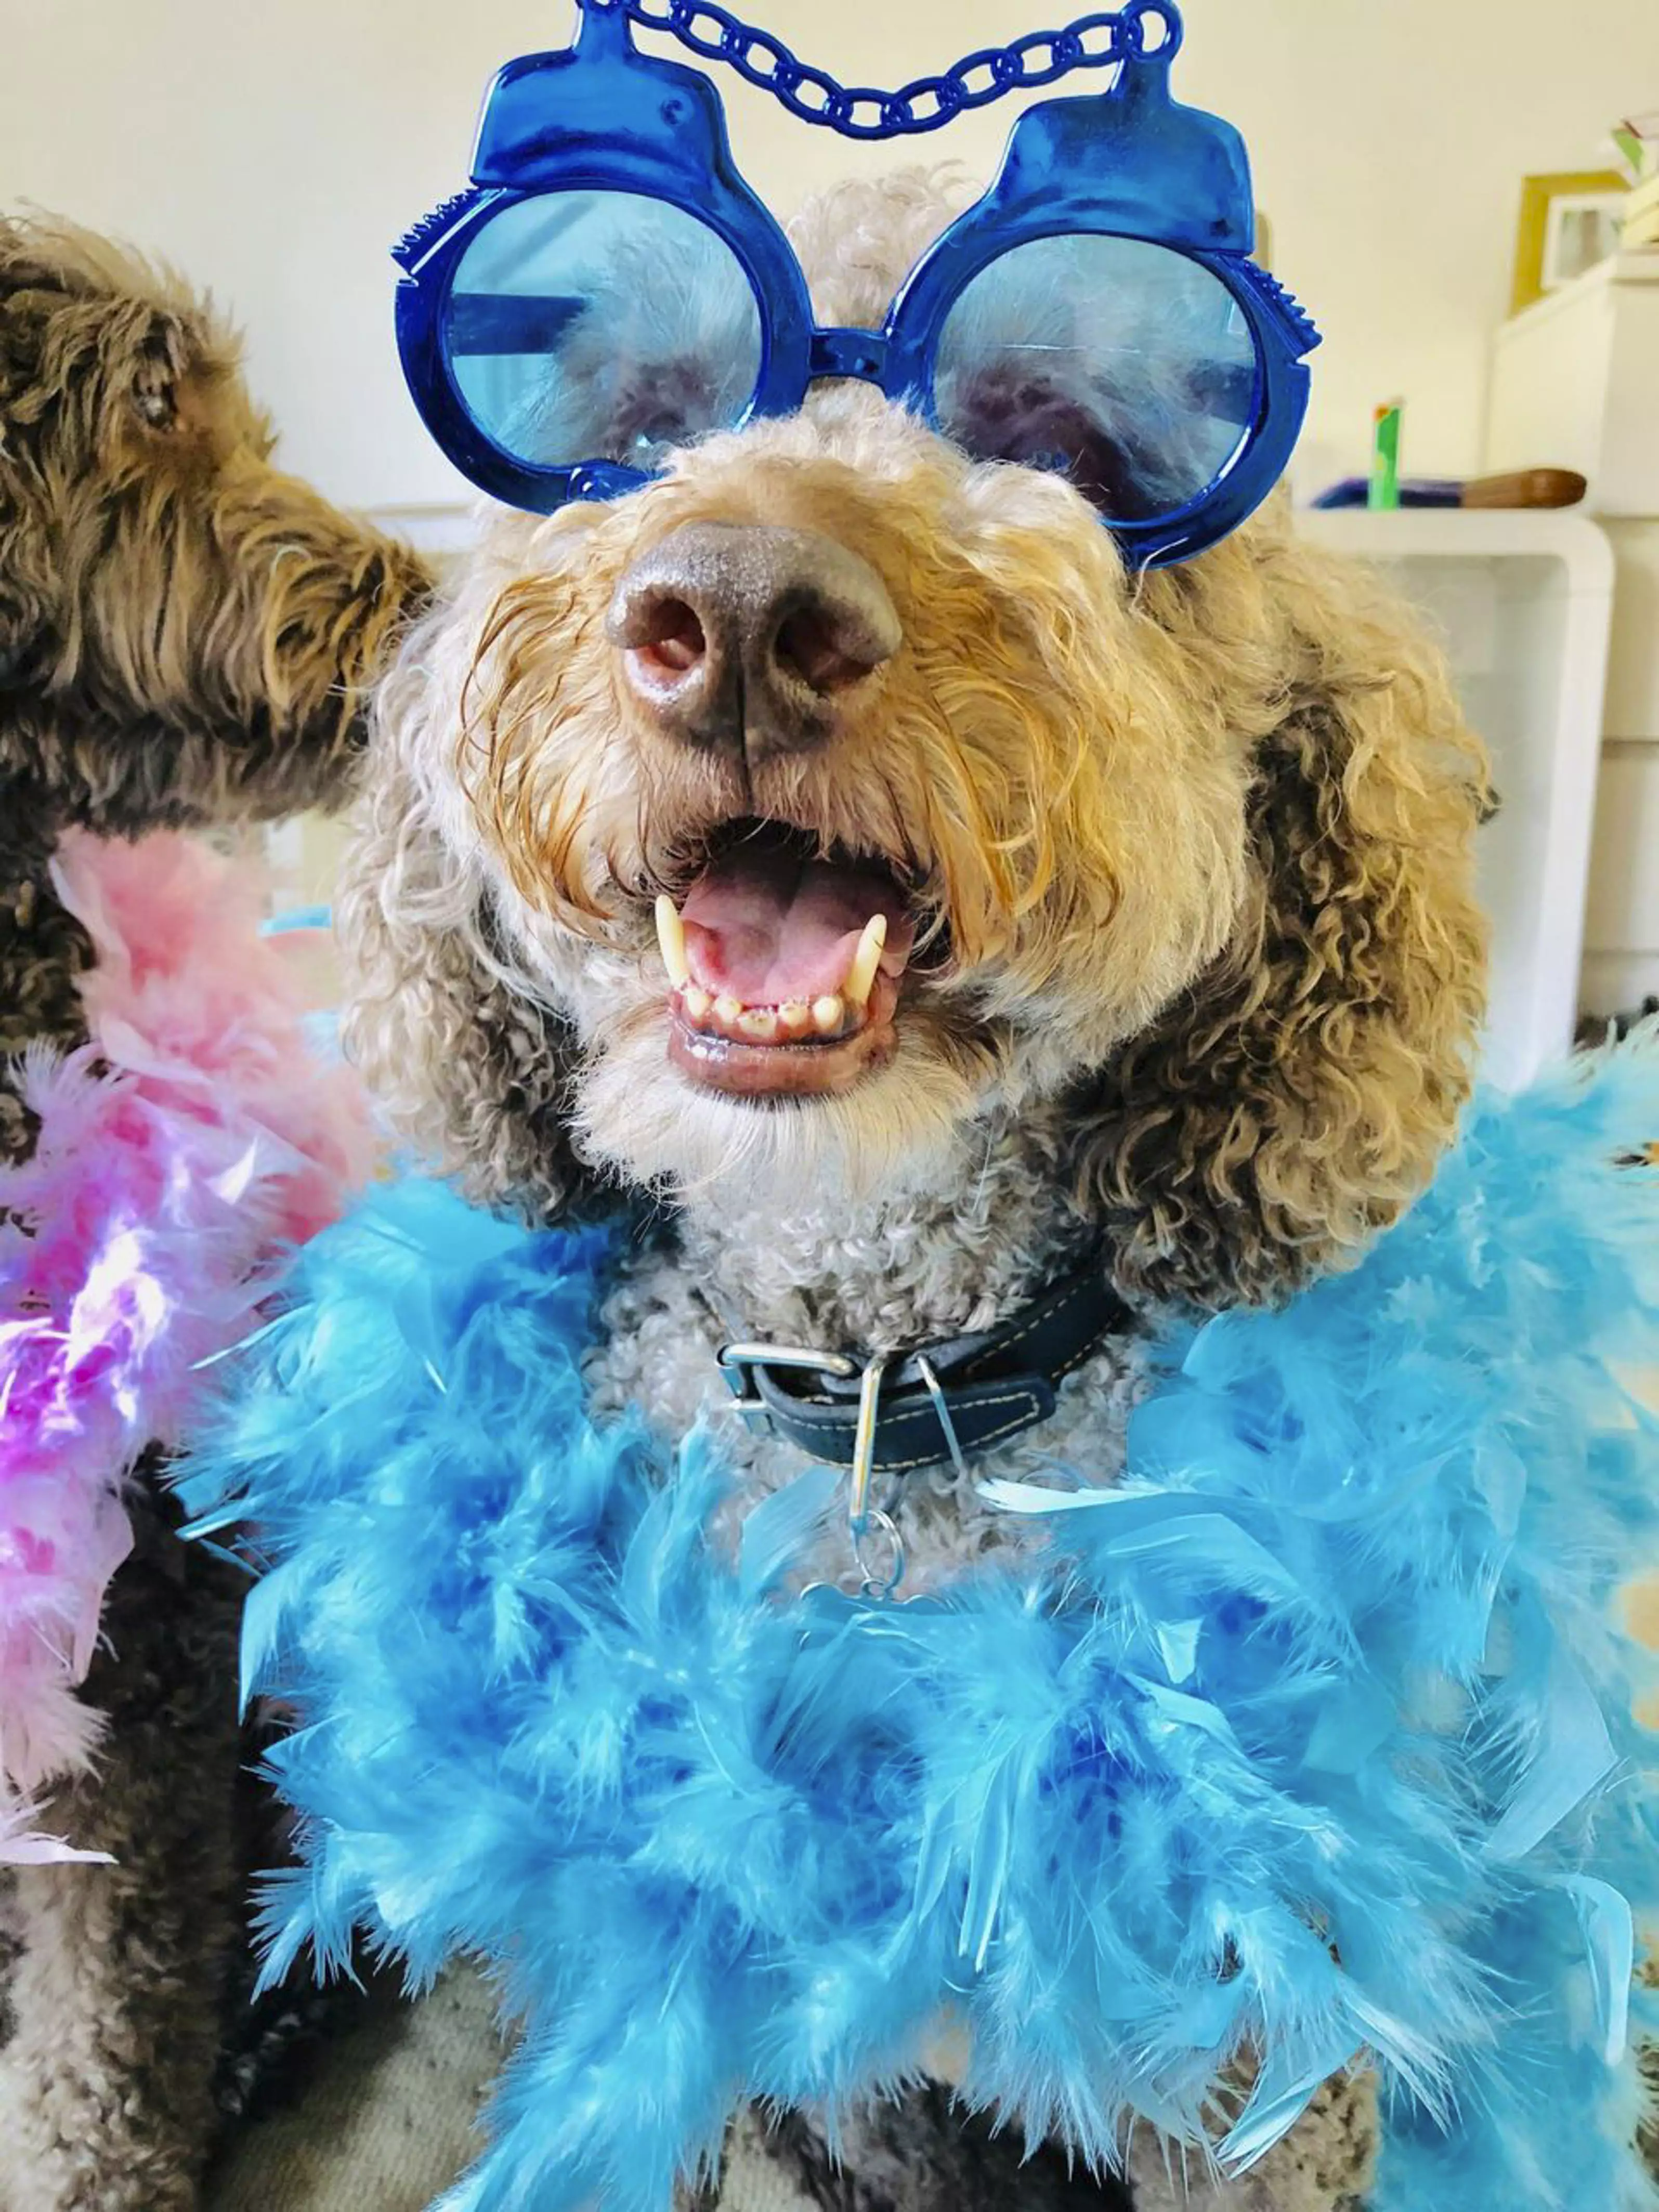 Some of the parties are fancy dress, making them even more fun for the doggos' parents (